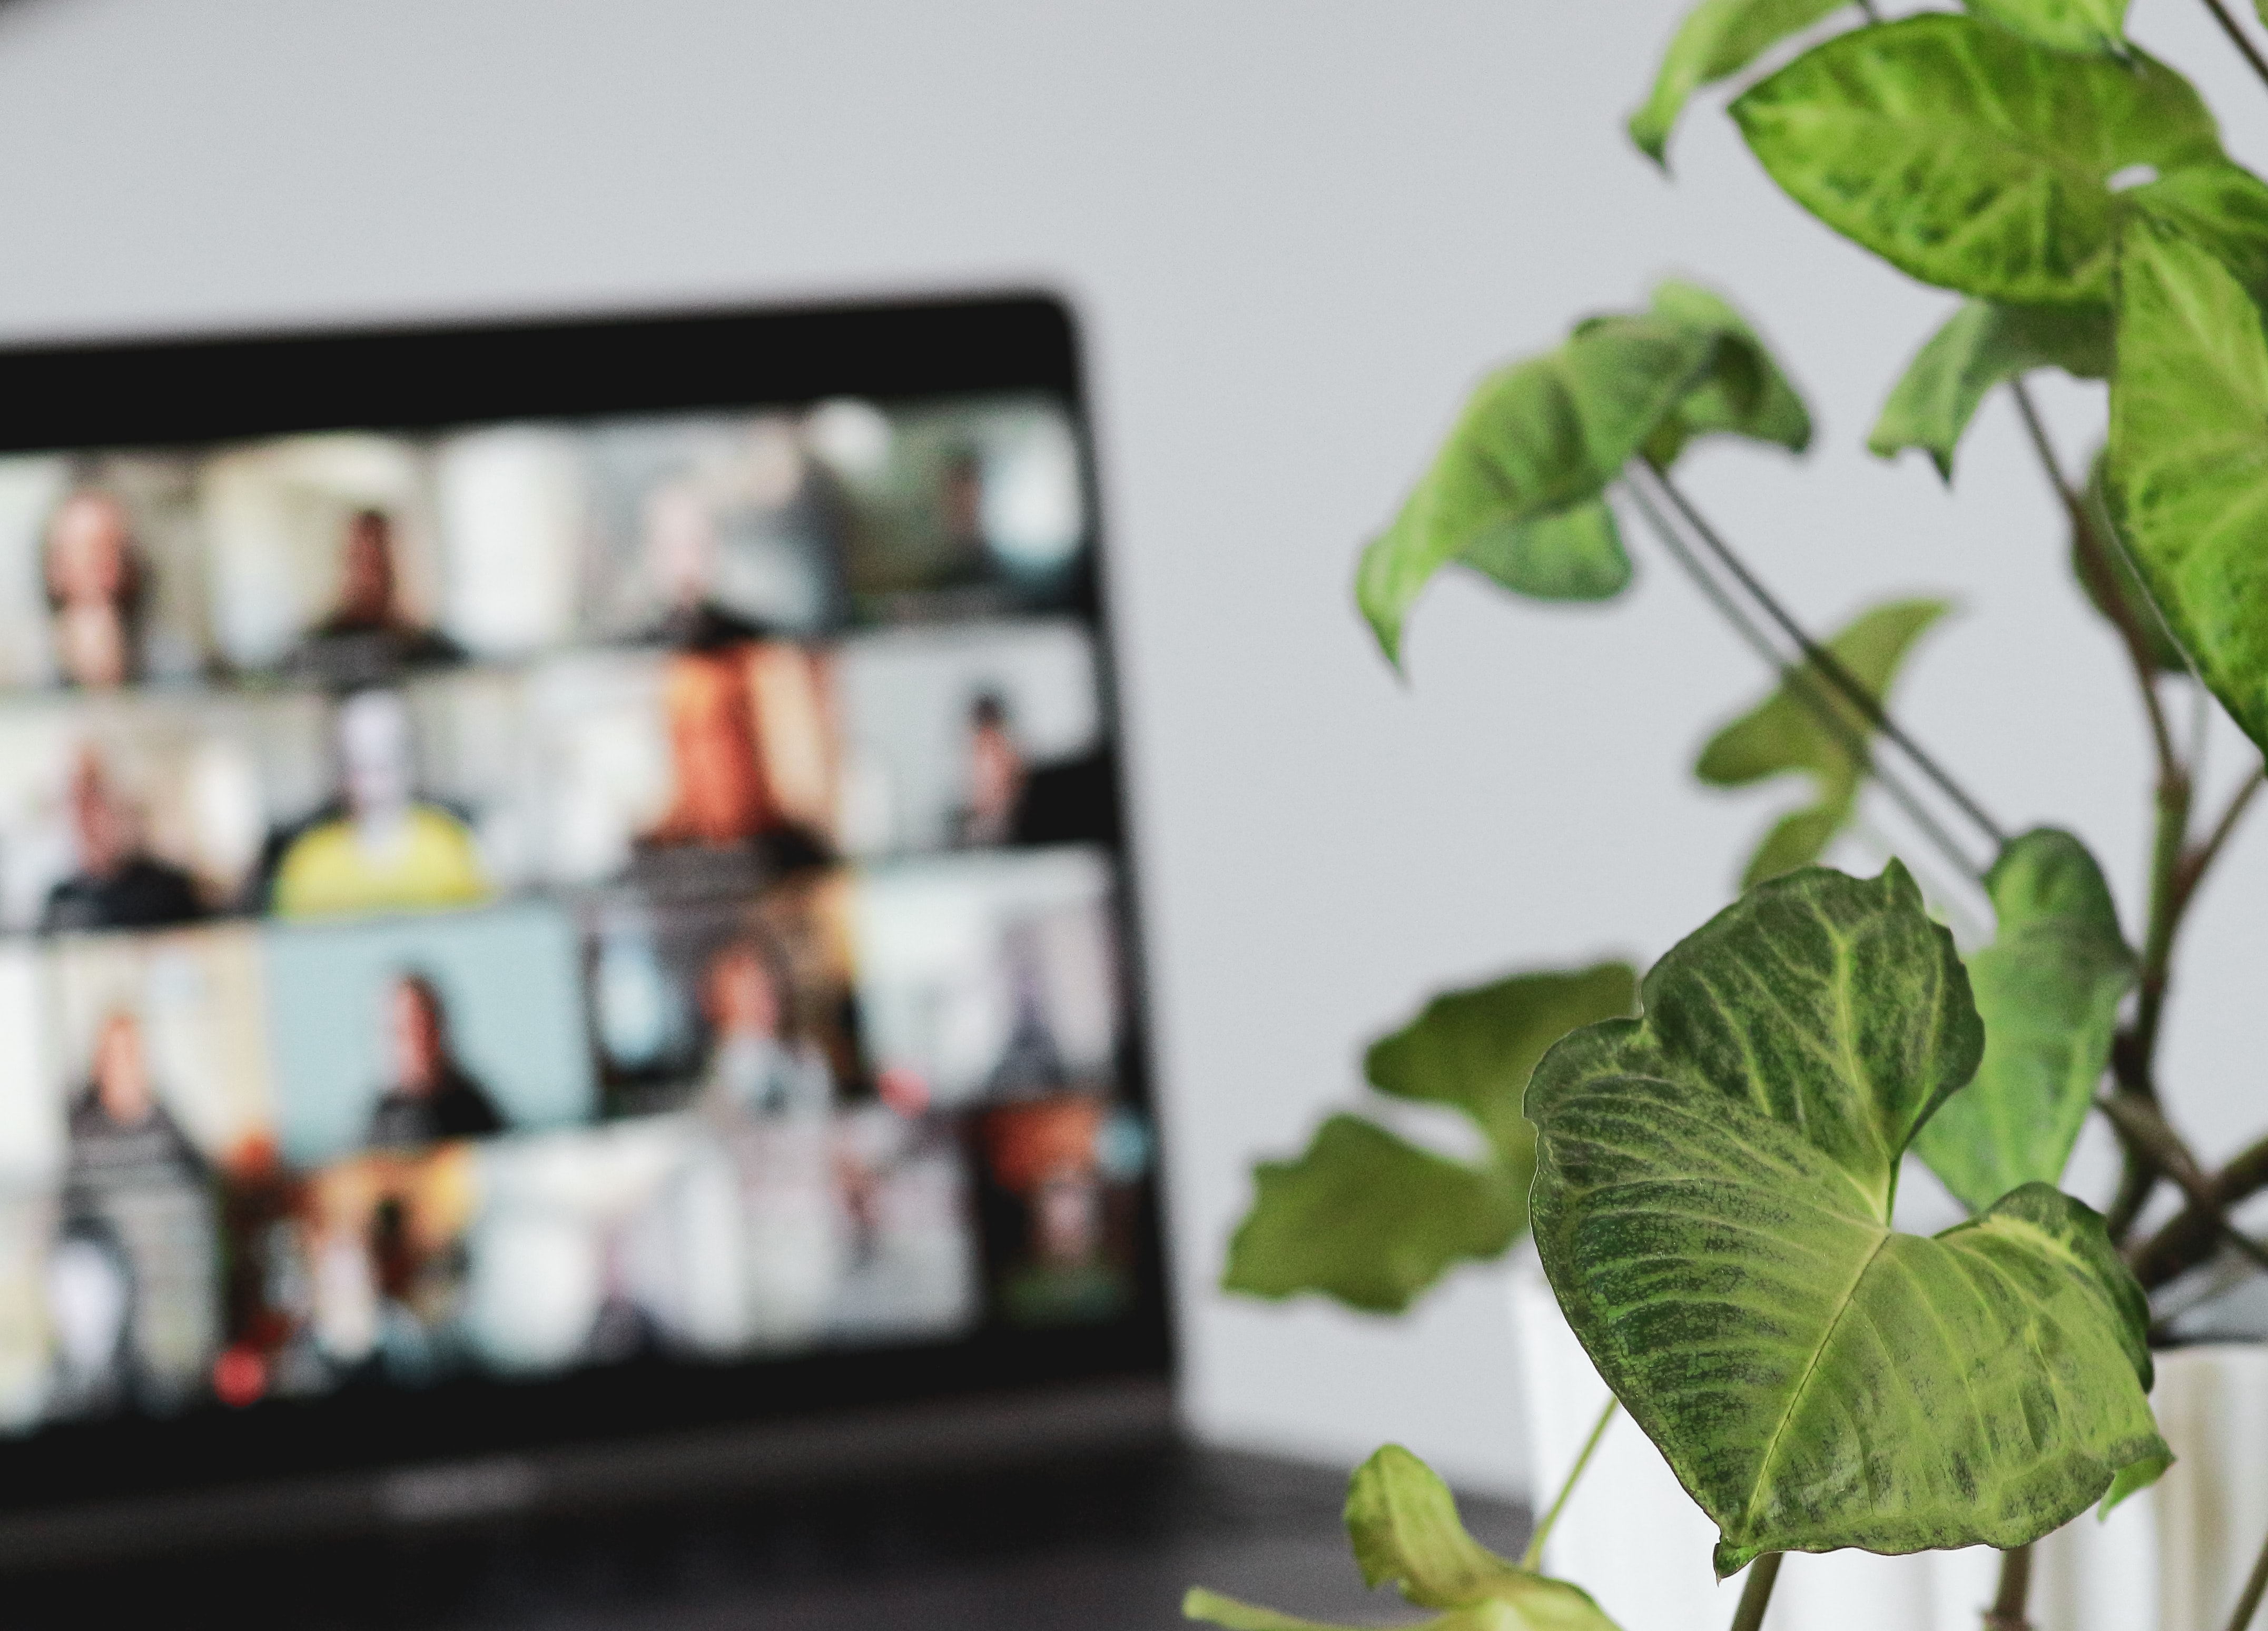 Laptop in background with a large group of profiles on the screen, green plant in focus at front